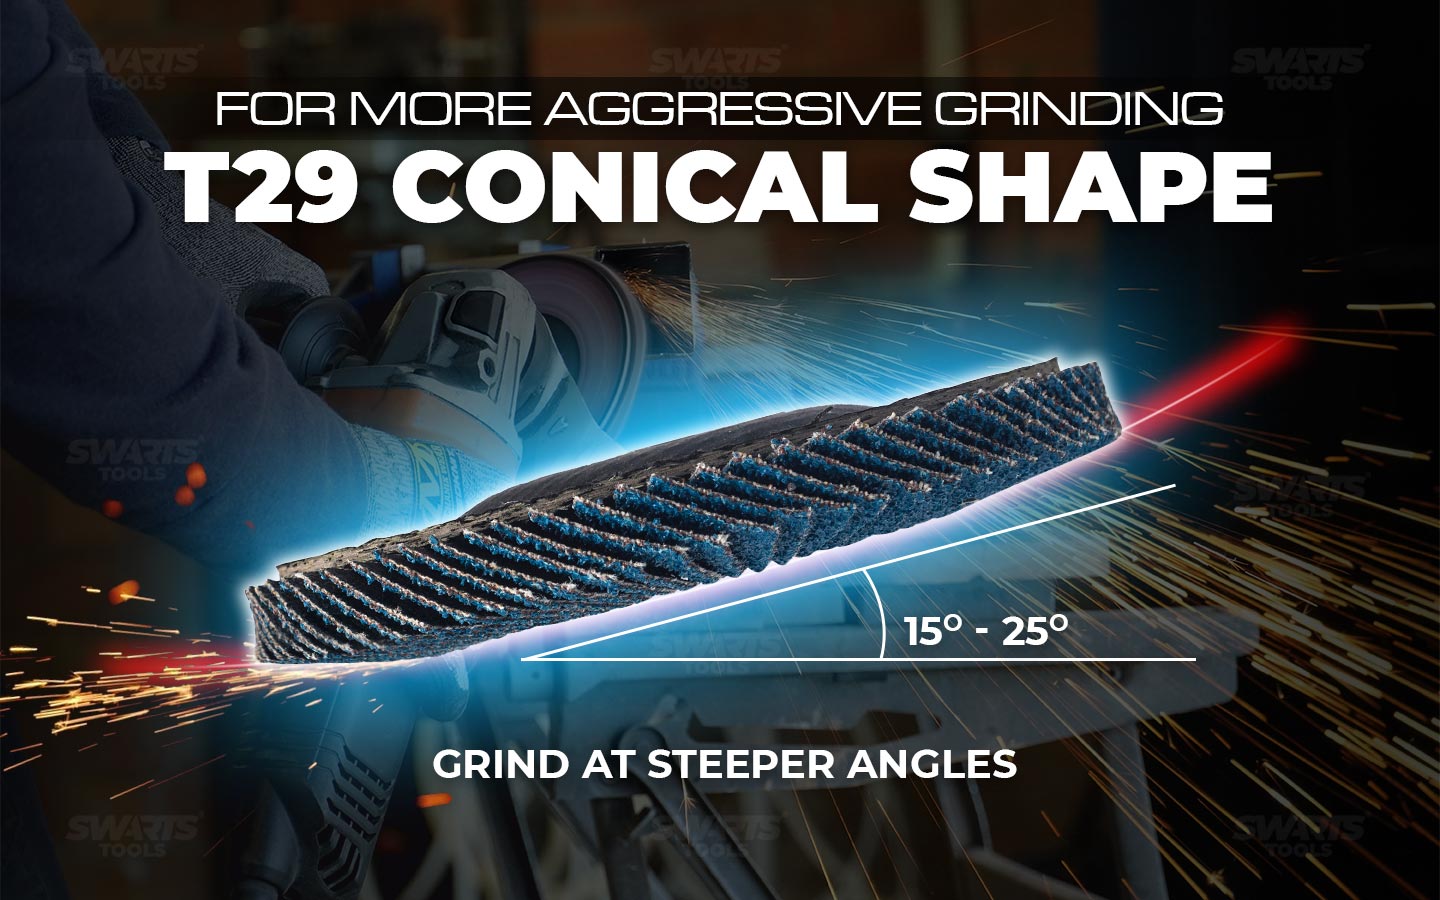 for more aggressive grinding, t29 conical shape grind at steeper angles